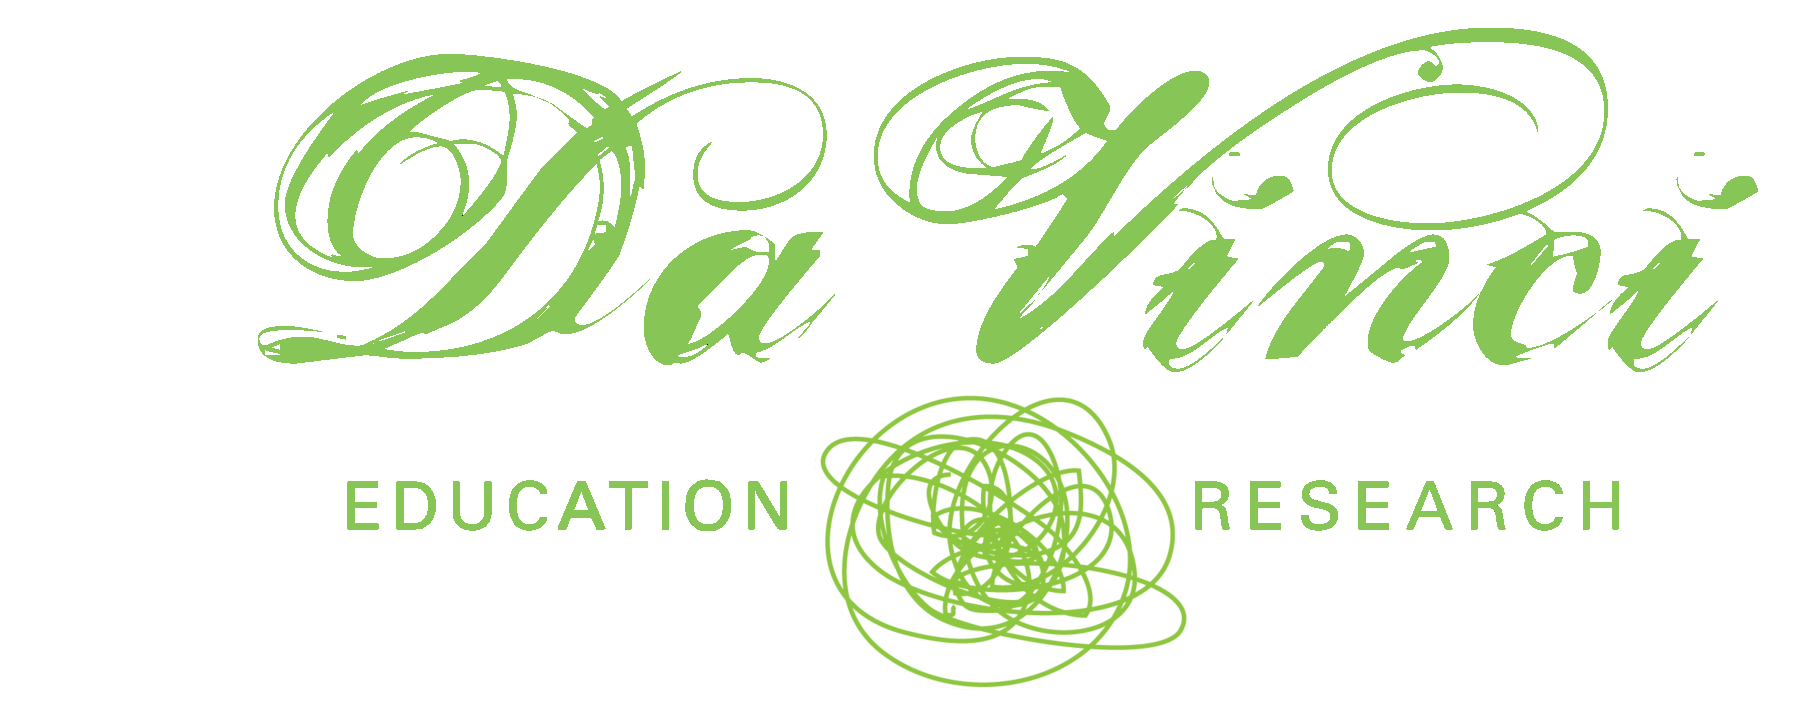 DaVinci Research and Education Center